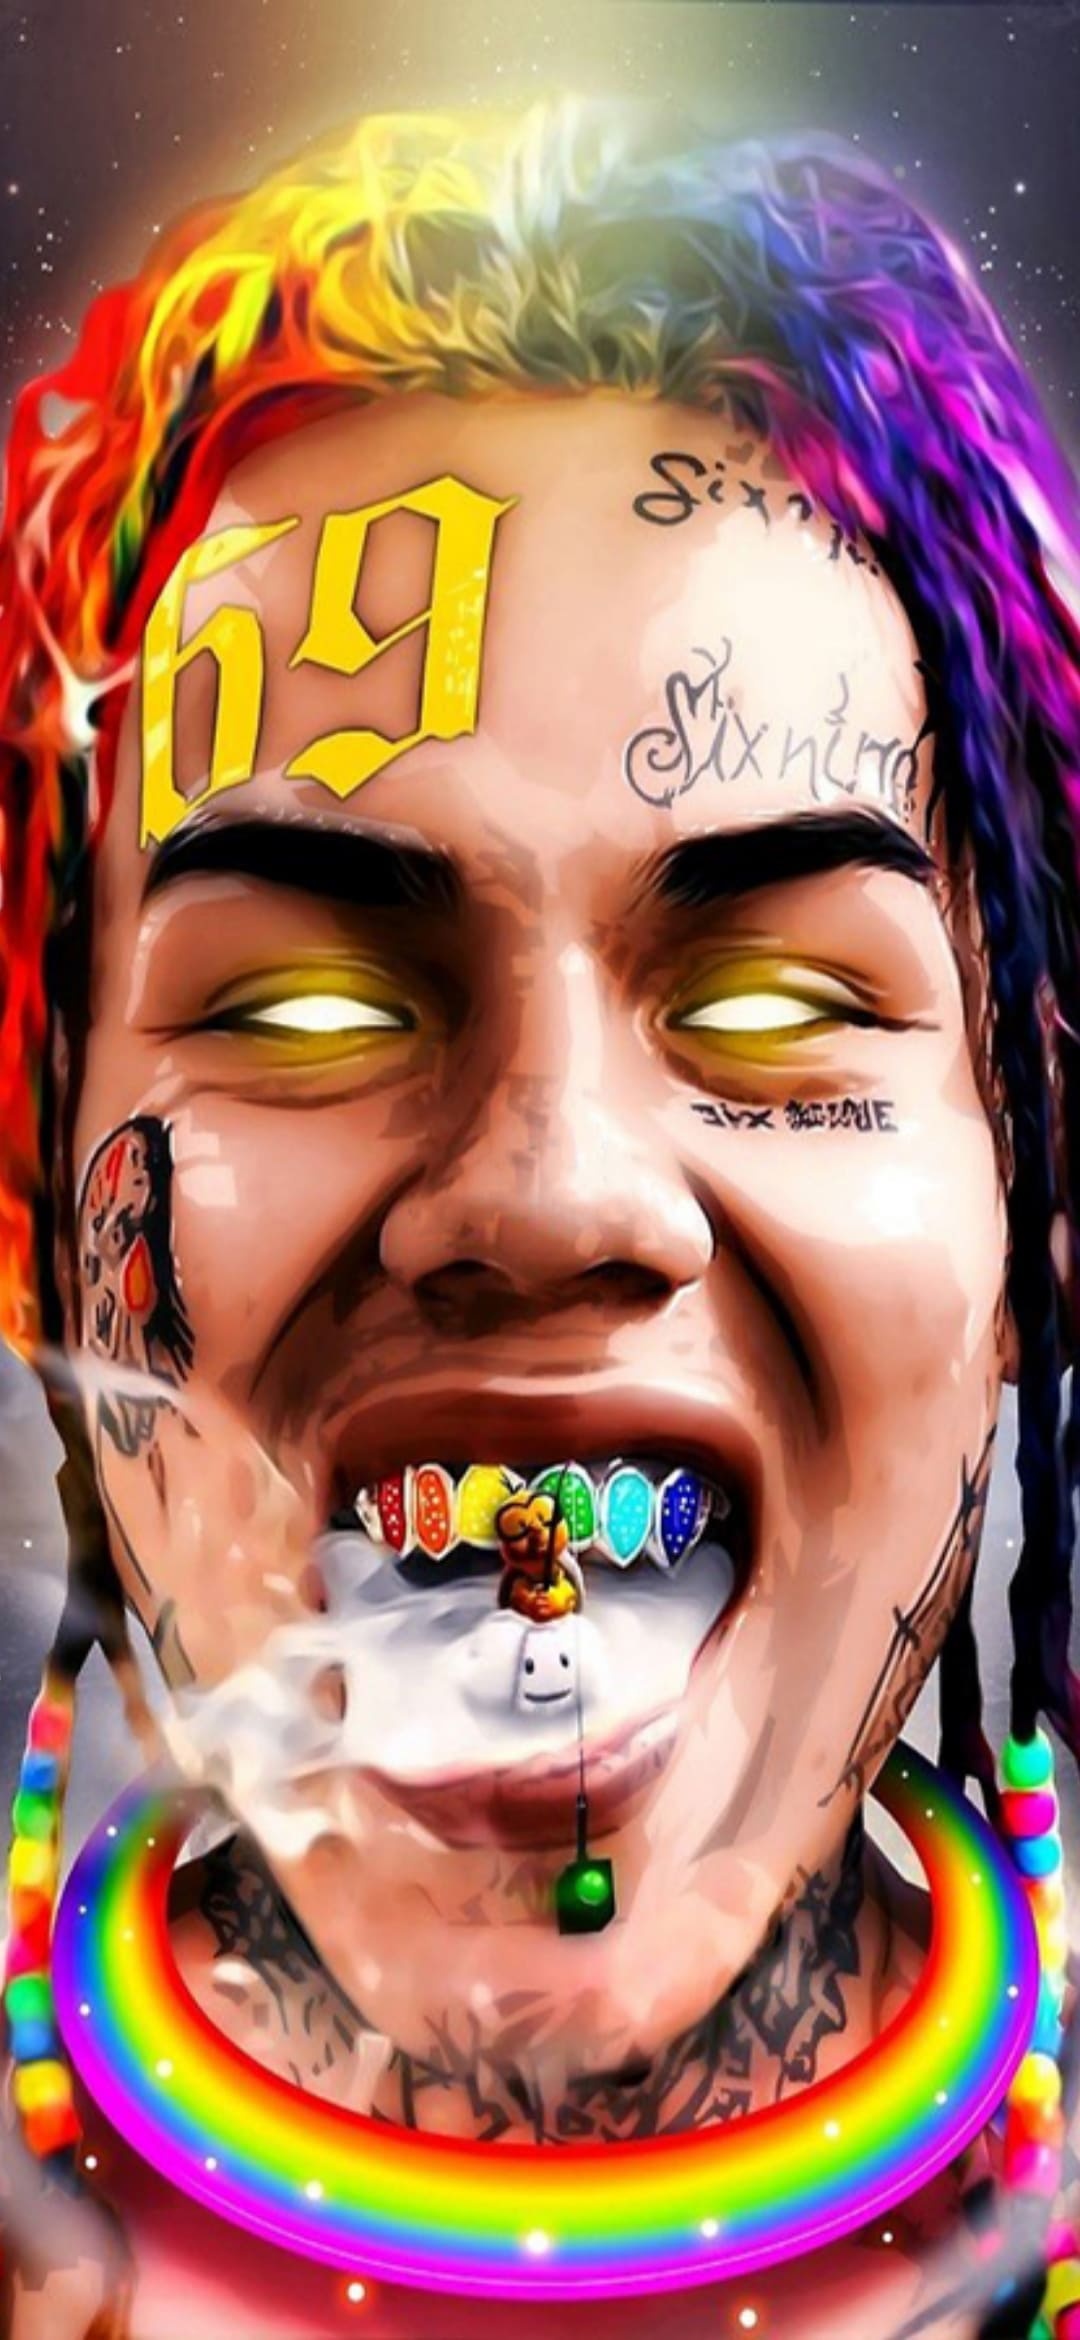 6ix9ine Wallpapers posted by Michelle Peltier 1080x2340